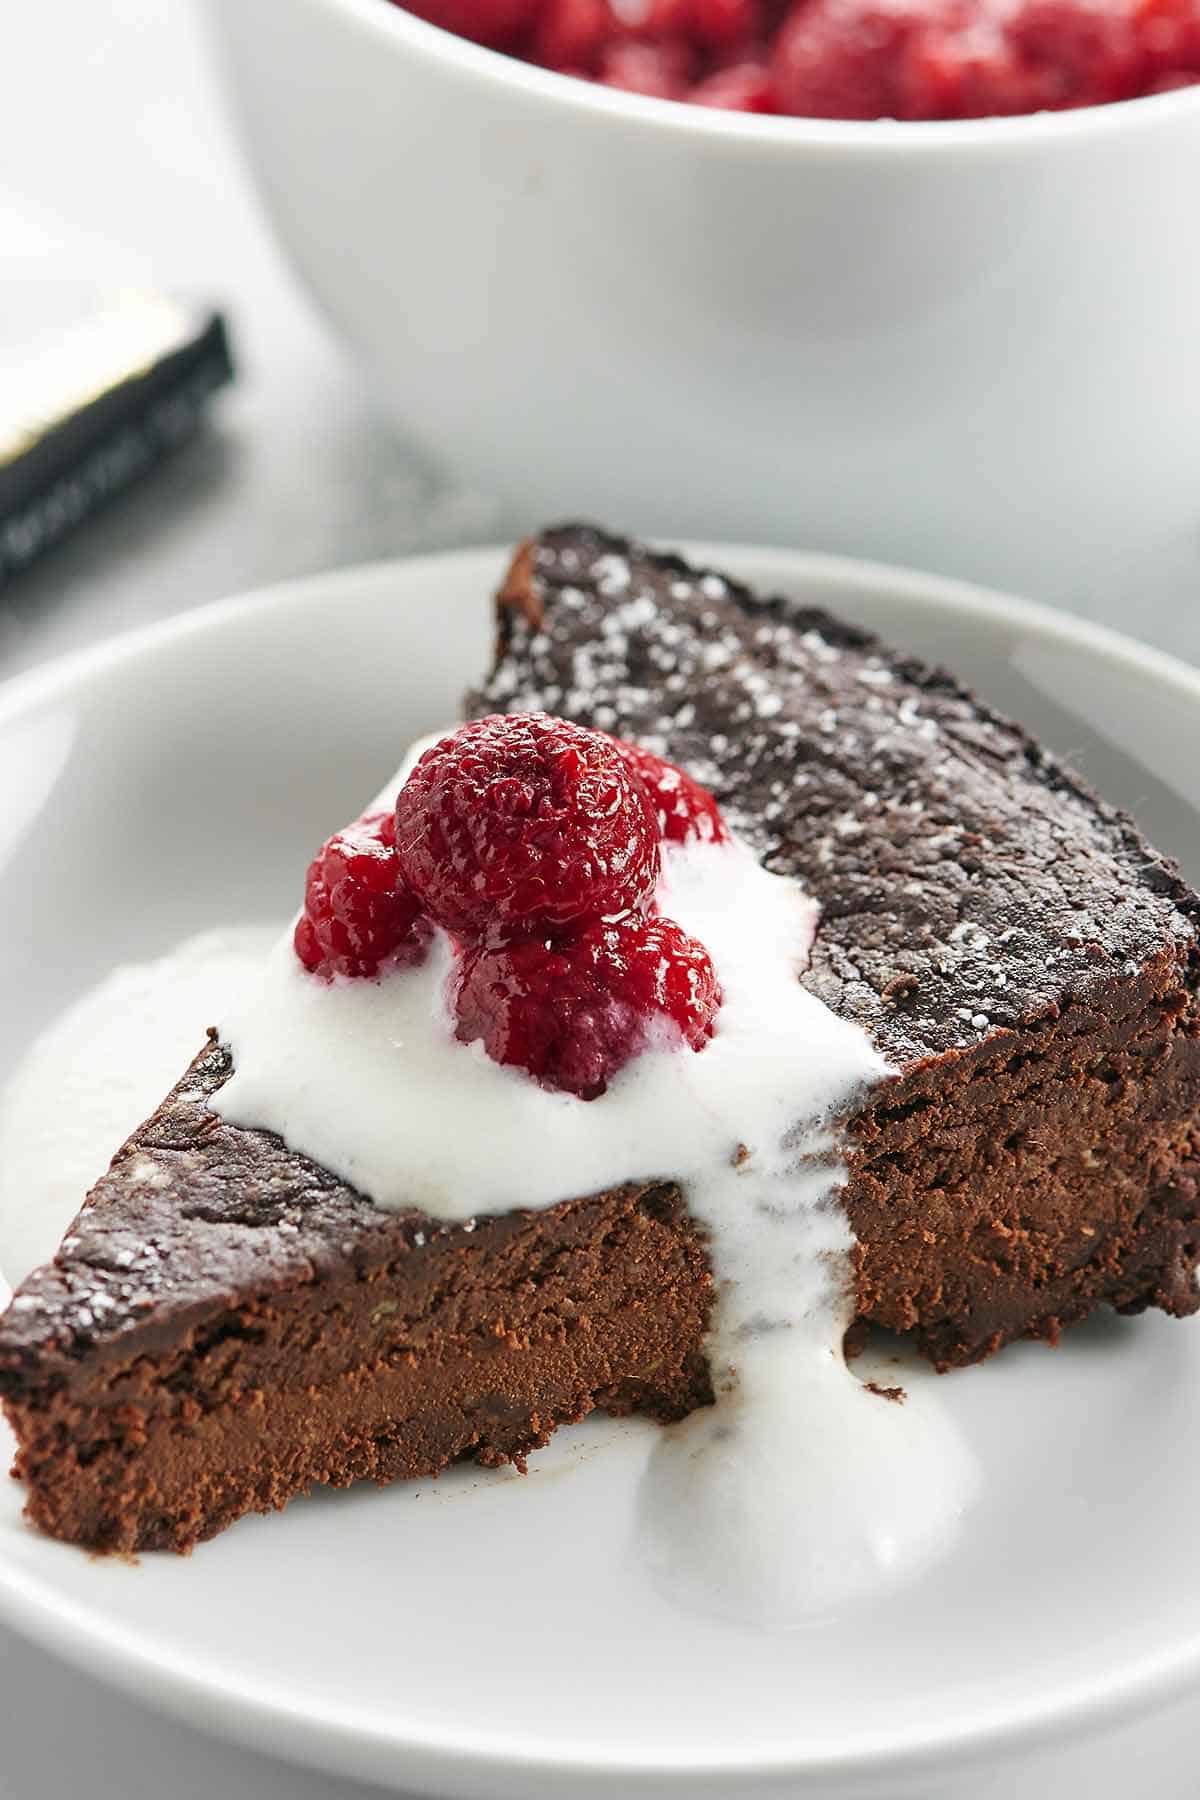 Slice of vegan chocolate cake with icing and raspberries on plate